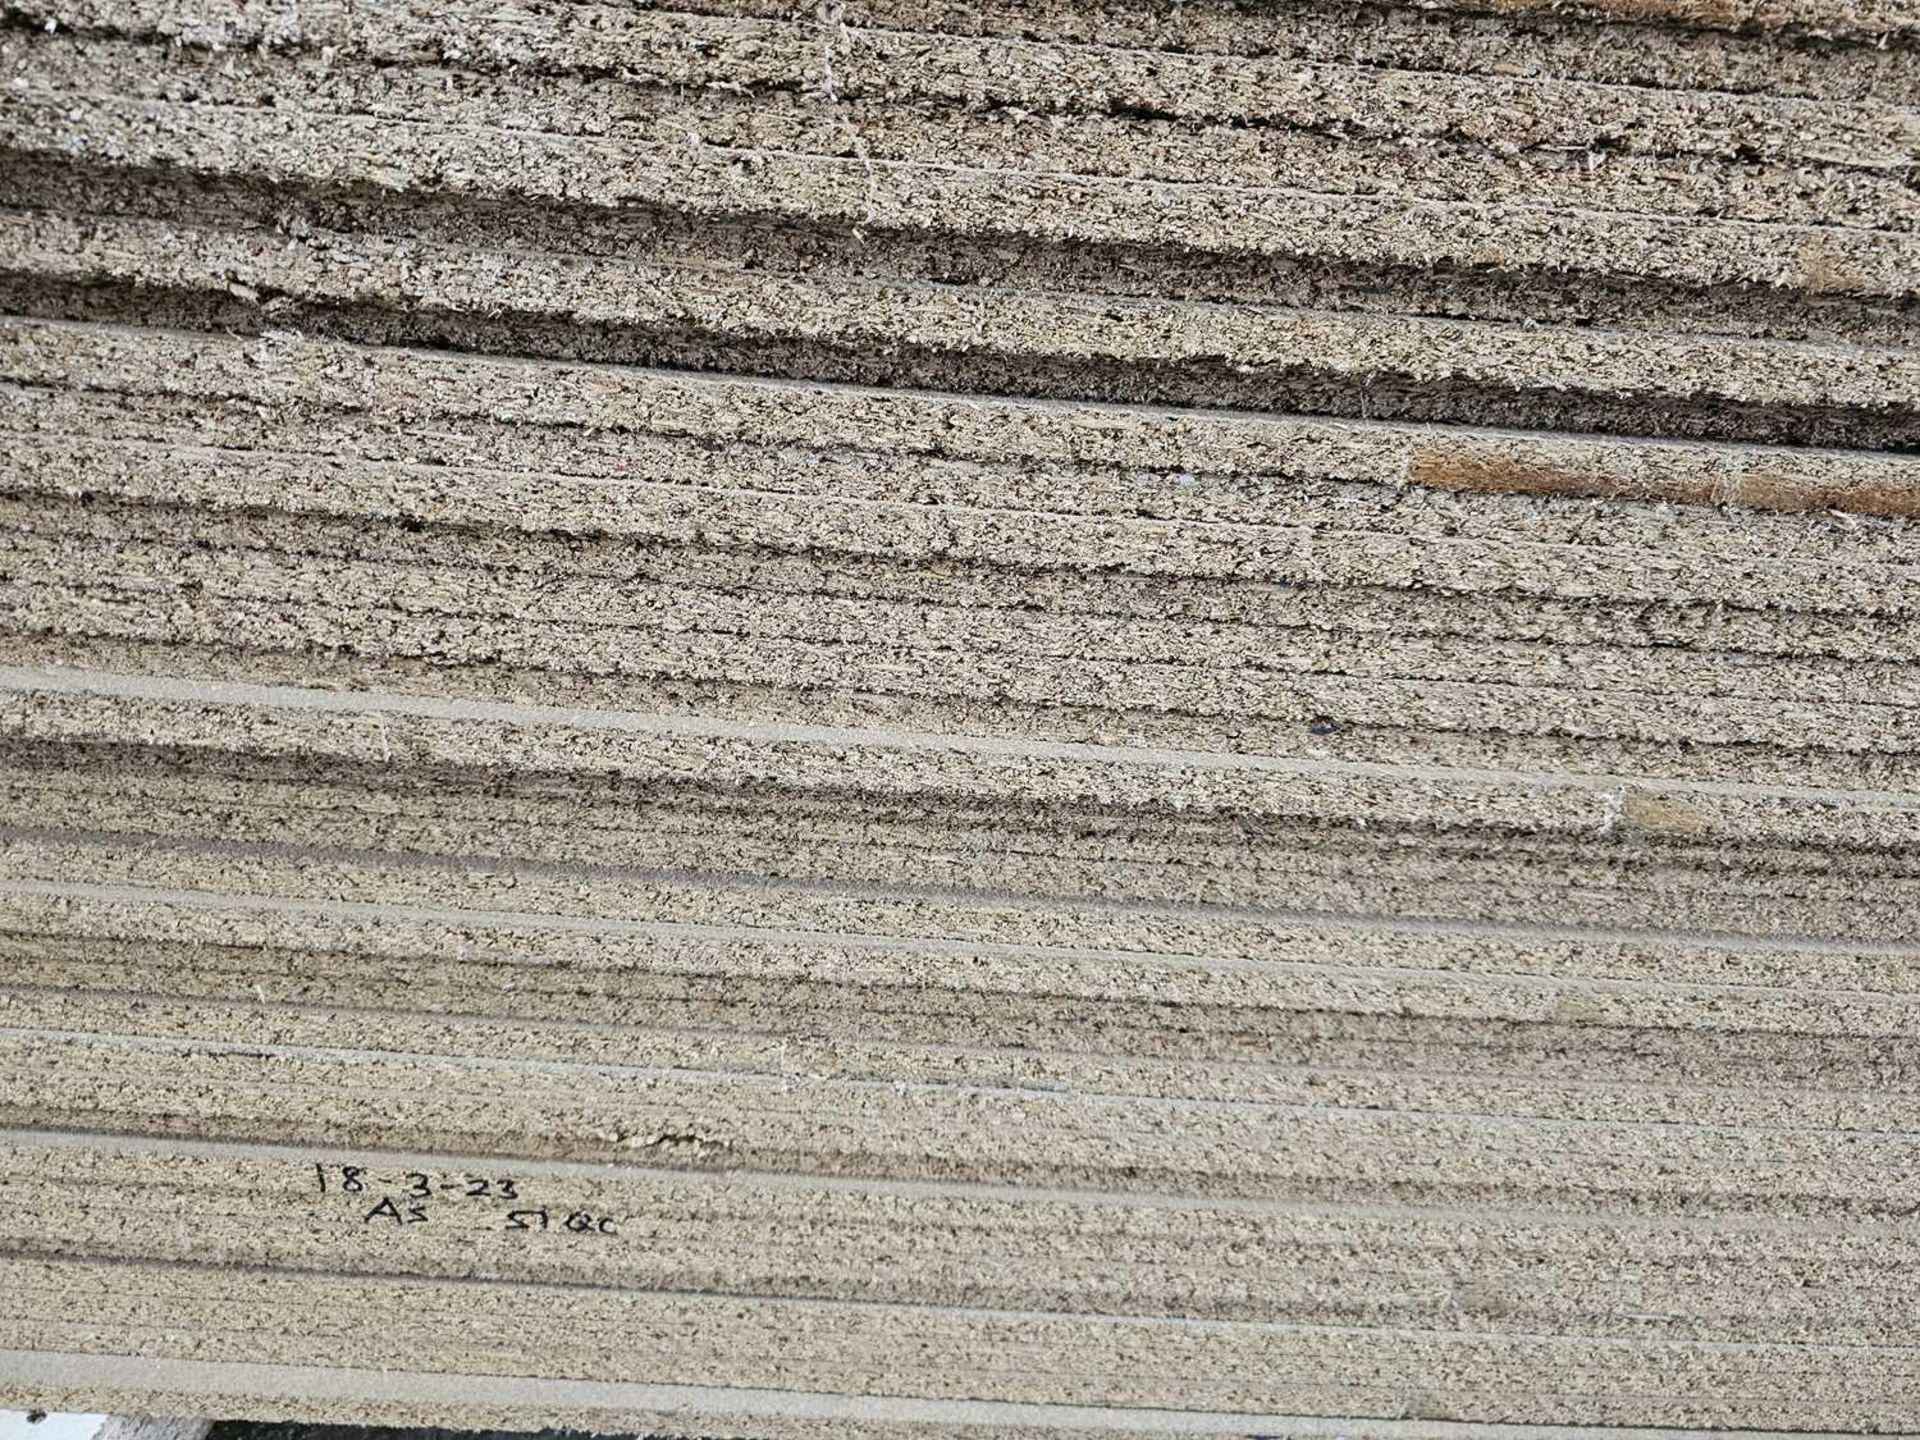 Selection of Chip Board Sheets (275cm x 184cm x 18mm)(39 of) - Image 3 of 3